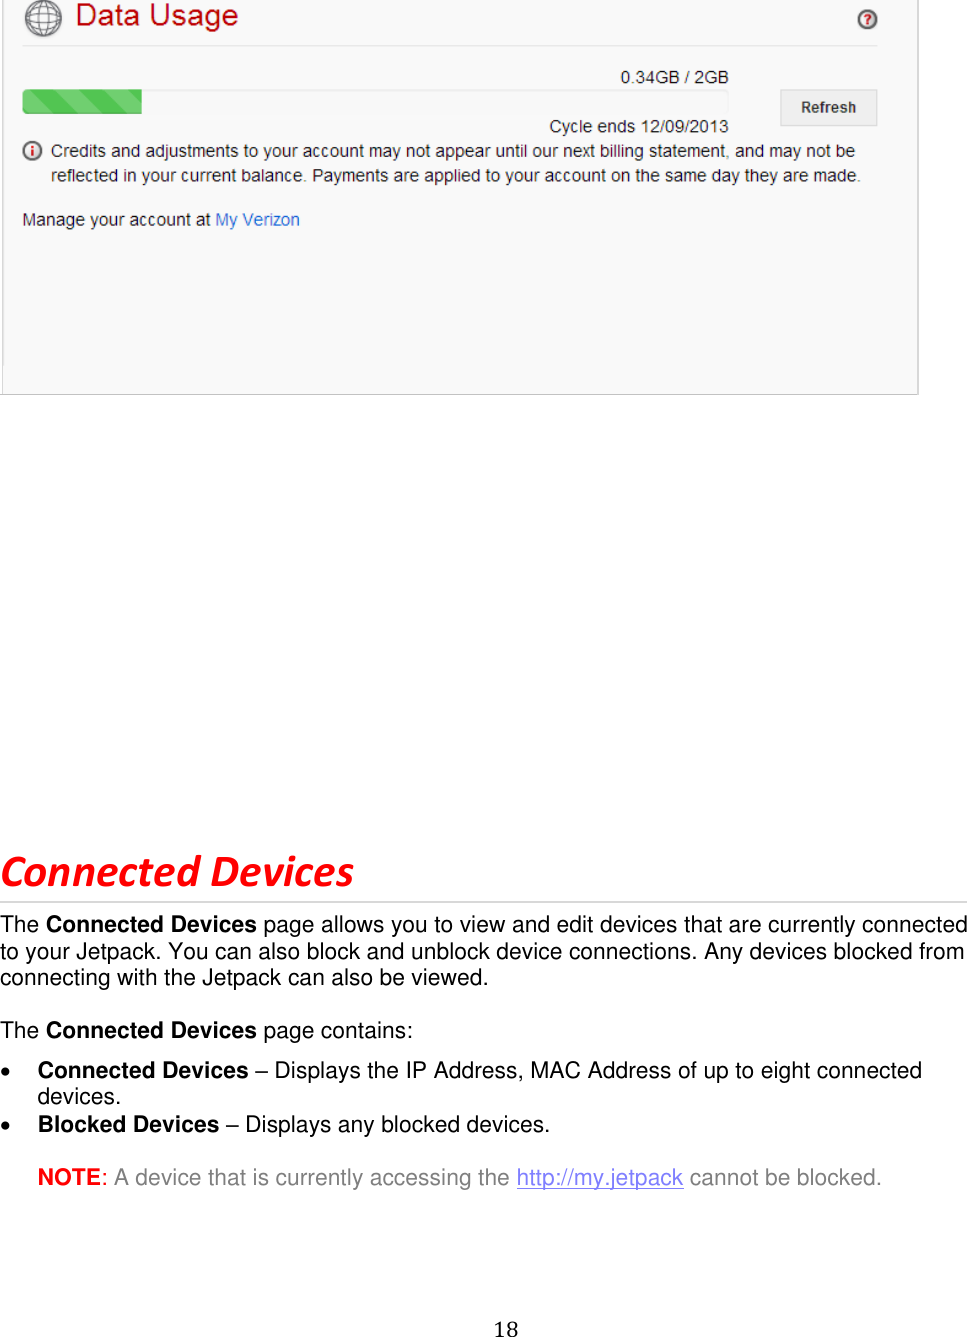   18                Connected Devices The Connected Devices page allows you to view and edit devices that are currently connected to your Jetpack. You can also block and unblock device connections. Any devices blocked from connecting with the Jetpack can also be viewed.  The Connected Devices page contains:  Connected Devices – Displays the IP Address, MAC Address of up to eight connected devices.  Blocked Devices – Displays any blocked devices.  NOTE: A device that is currently accessing the http://my.jetpack cannot be blocked. 